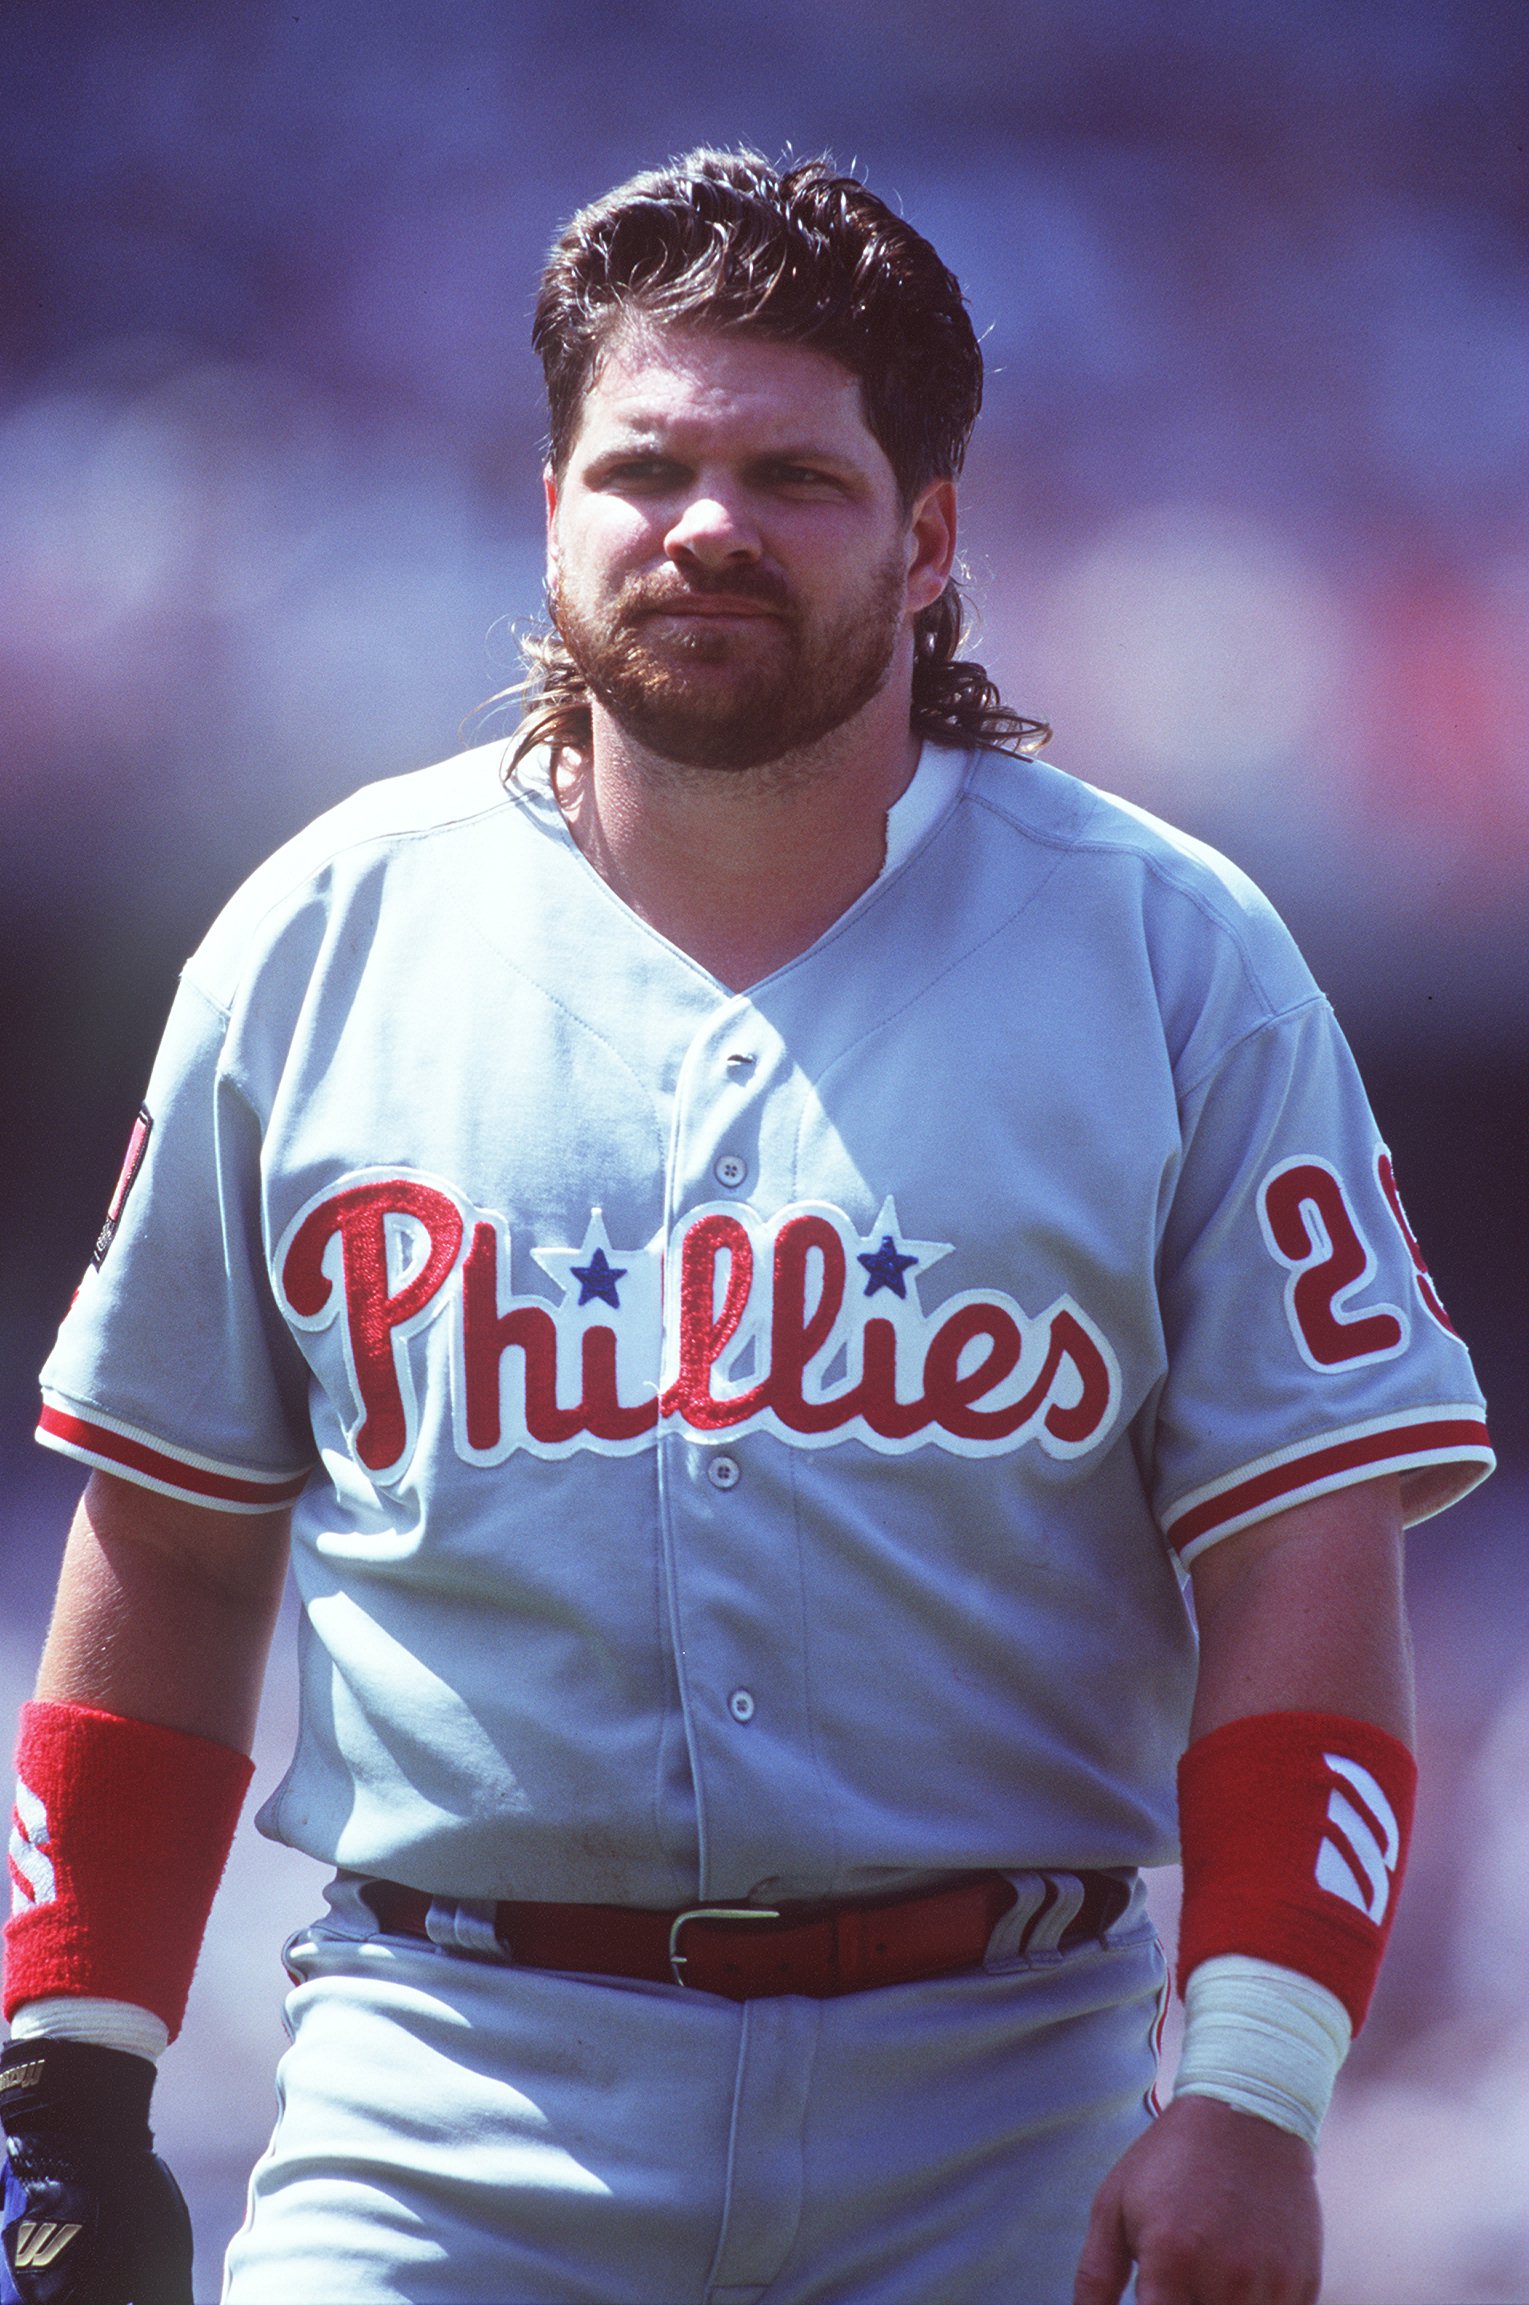 25 Baseball Mullets That Deserve to Be In the Hall of Fame